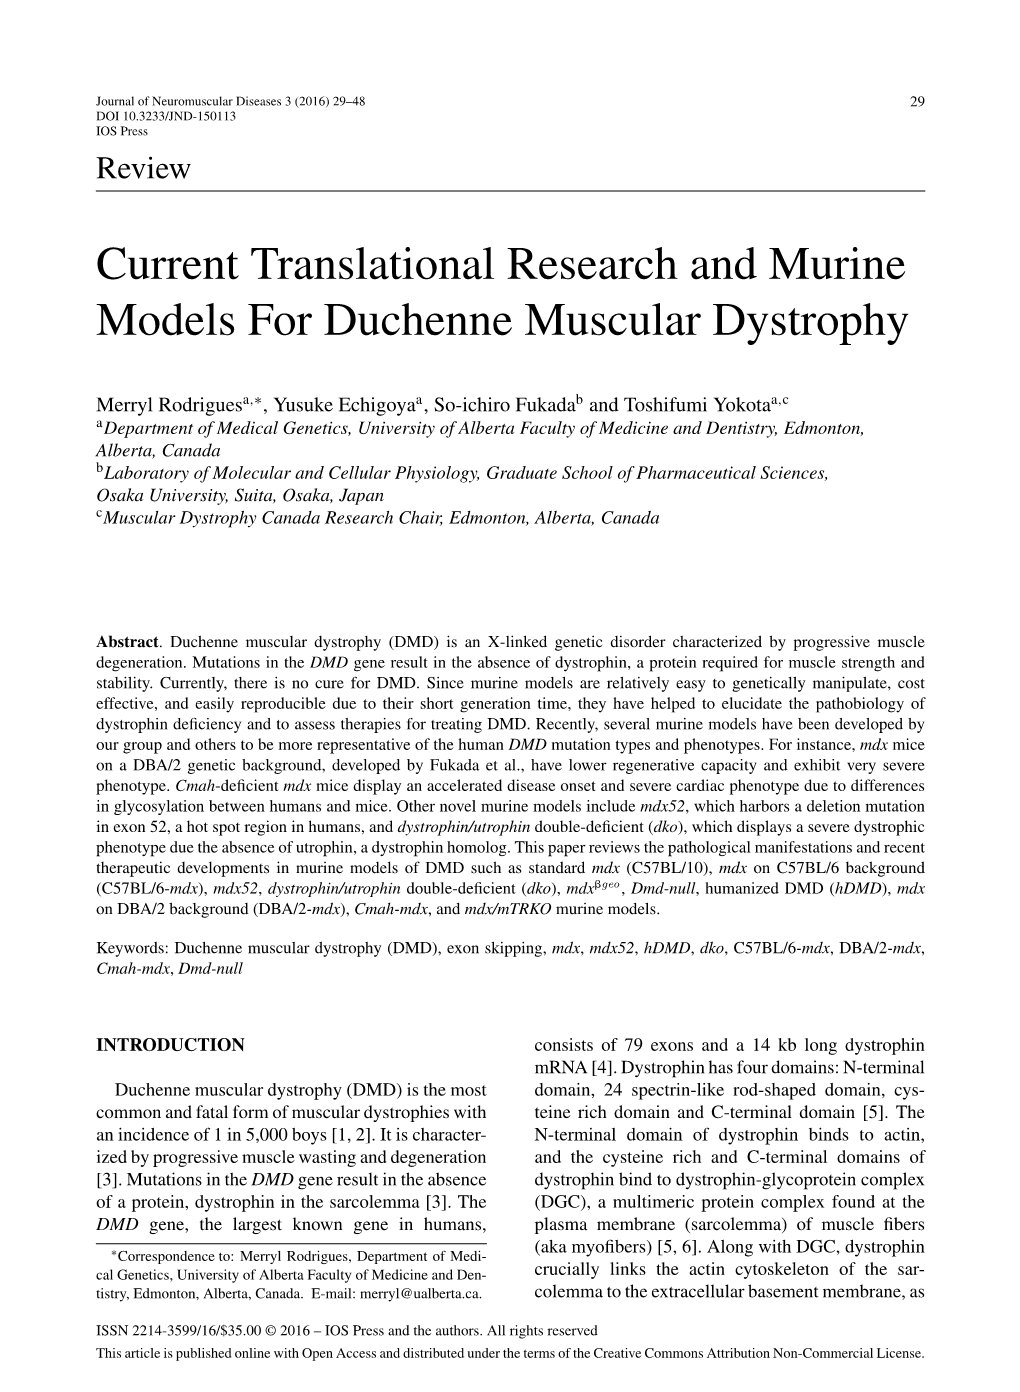 Current Translational Research and Murine Models for Duchenne Muscular Dystrophy